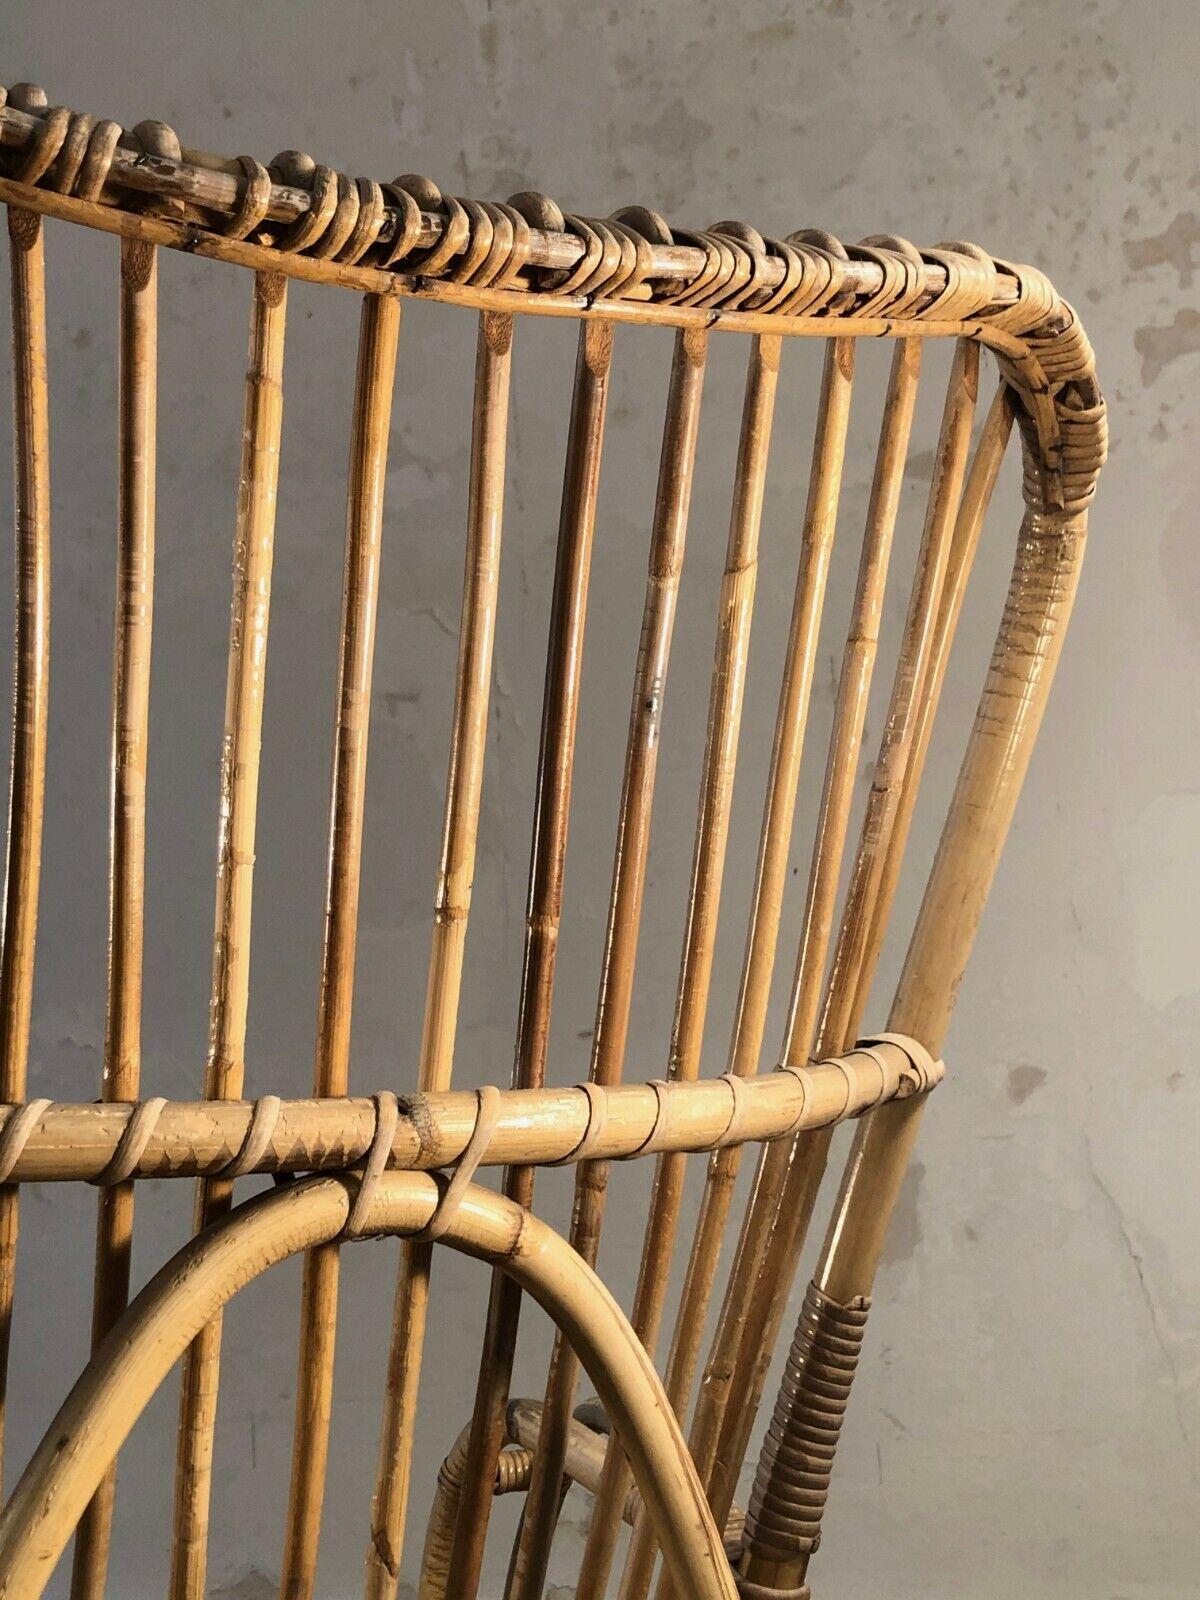 Hand-Woven A MID-CENTURY-MODERN BRUTALIST Armchair in AUDOUX-MINNET Style, France 1950 For Sale